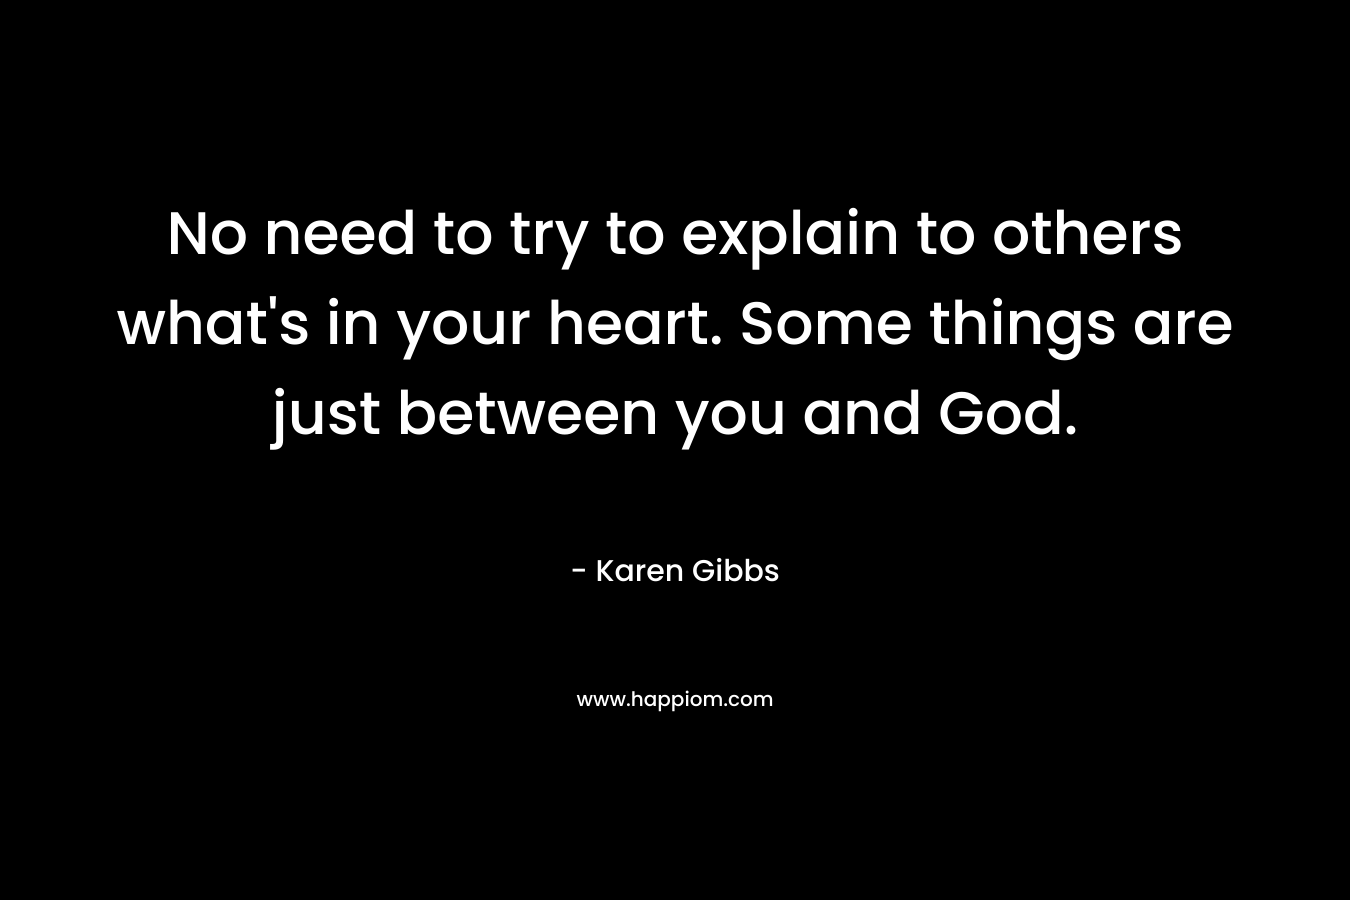 No need to try to explain to others what's in your heart. Some things are just between you and God.